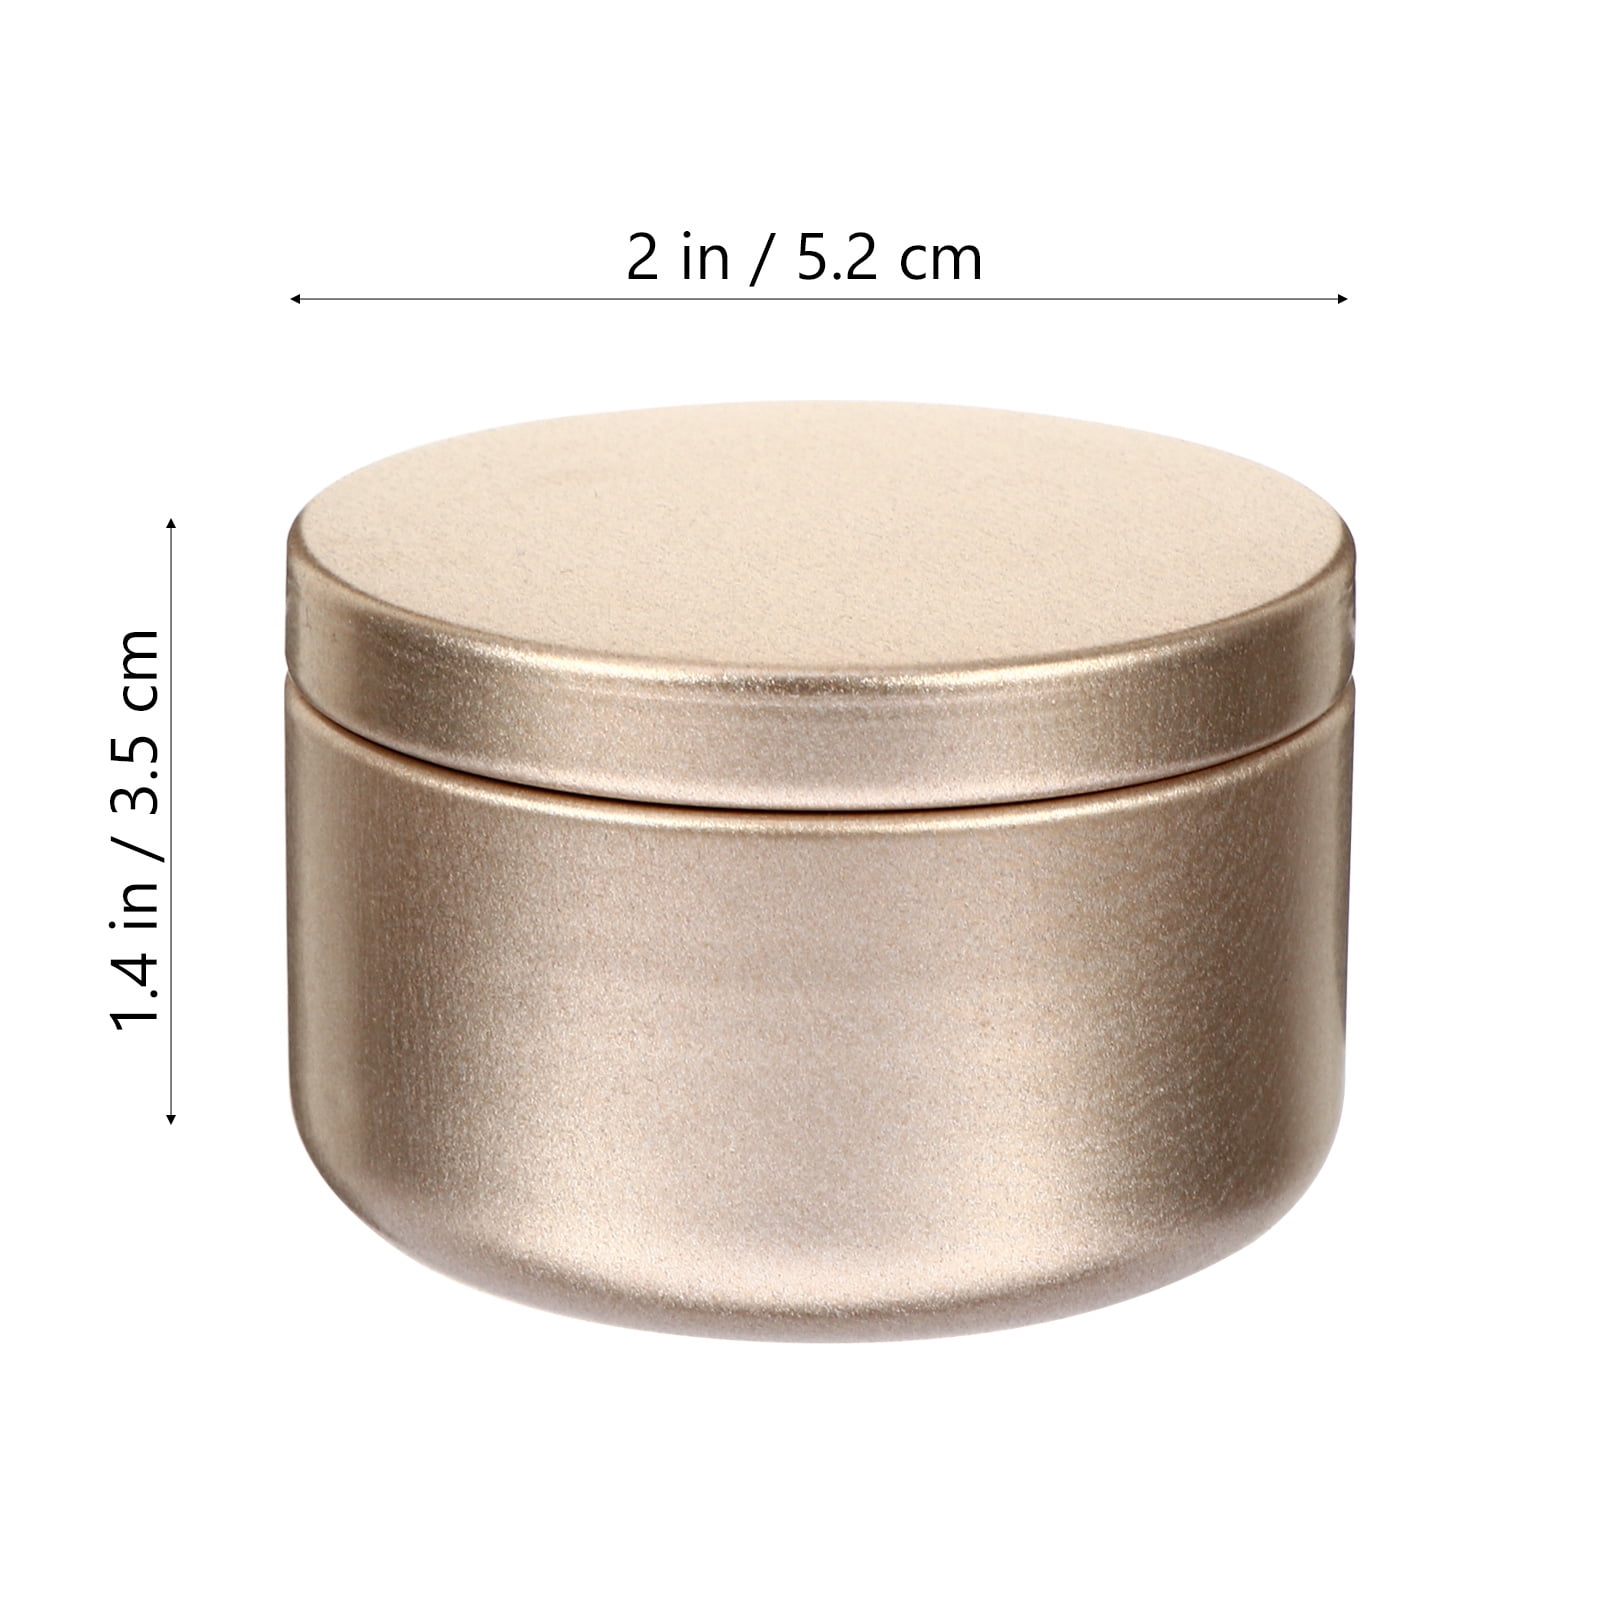 12PCS Metal Candle Tins Candle Container Travel Tins DIY Candle Making Jars 